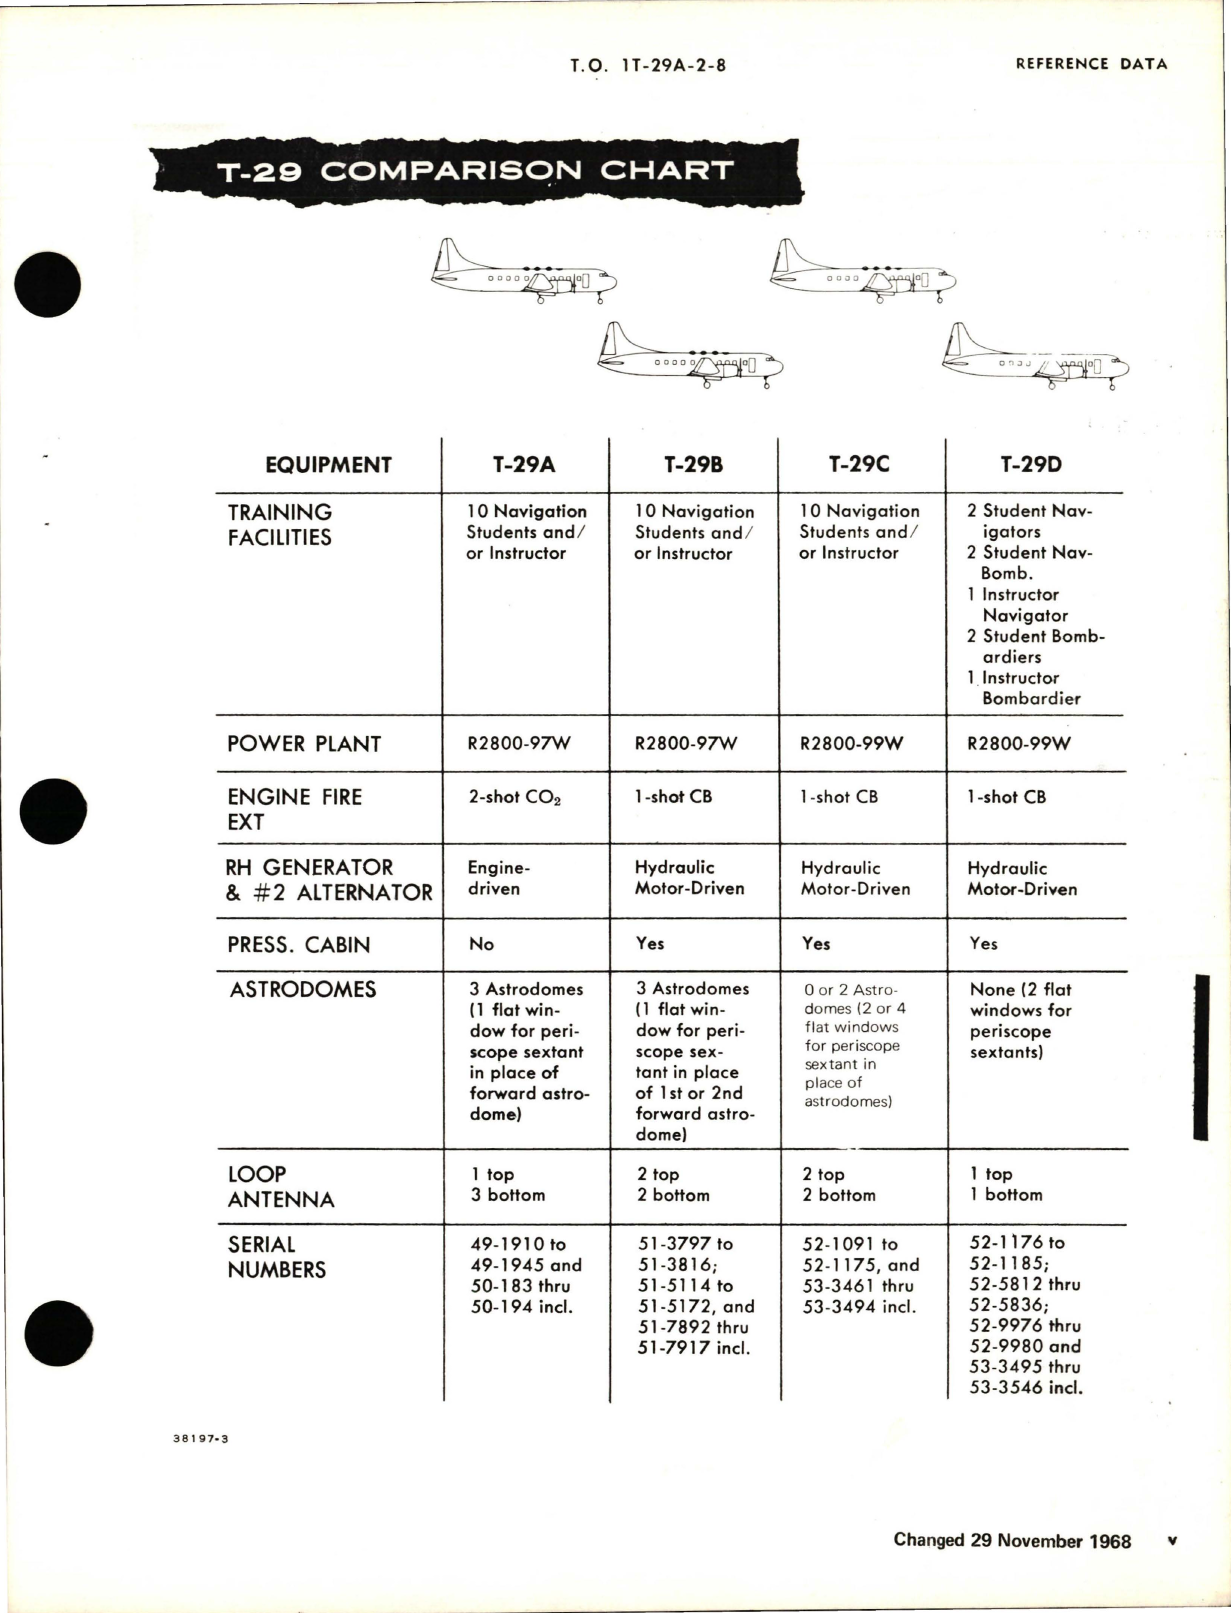 Sample page 7 from AirCorps Library document: Maintenance Manual for Flight Control Systems - T-29A, T-29B, T-29C and T-29D